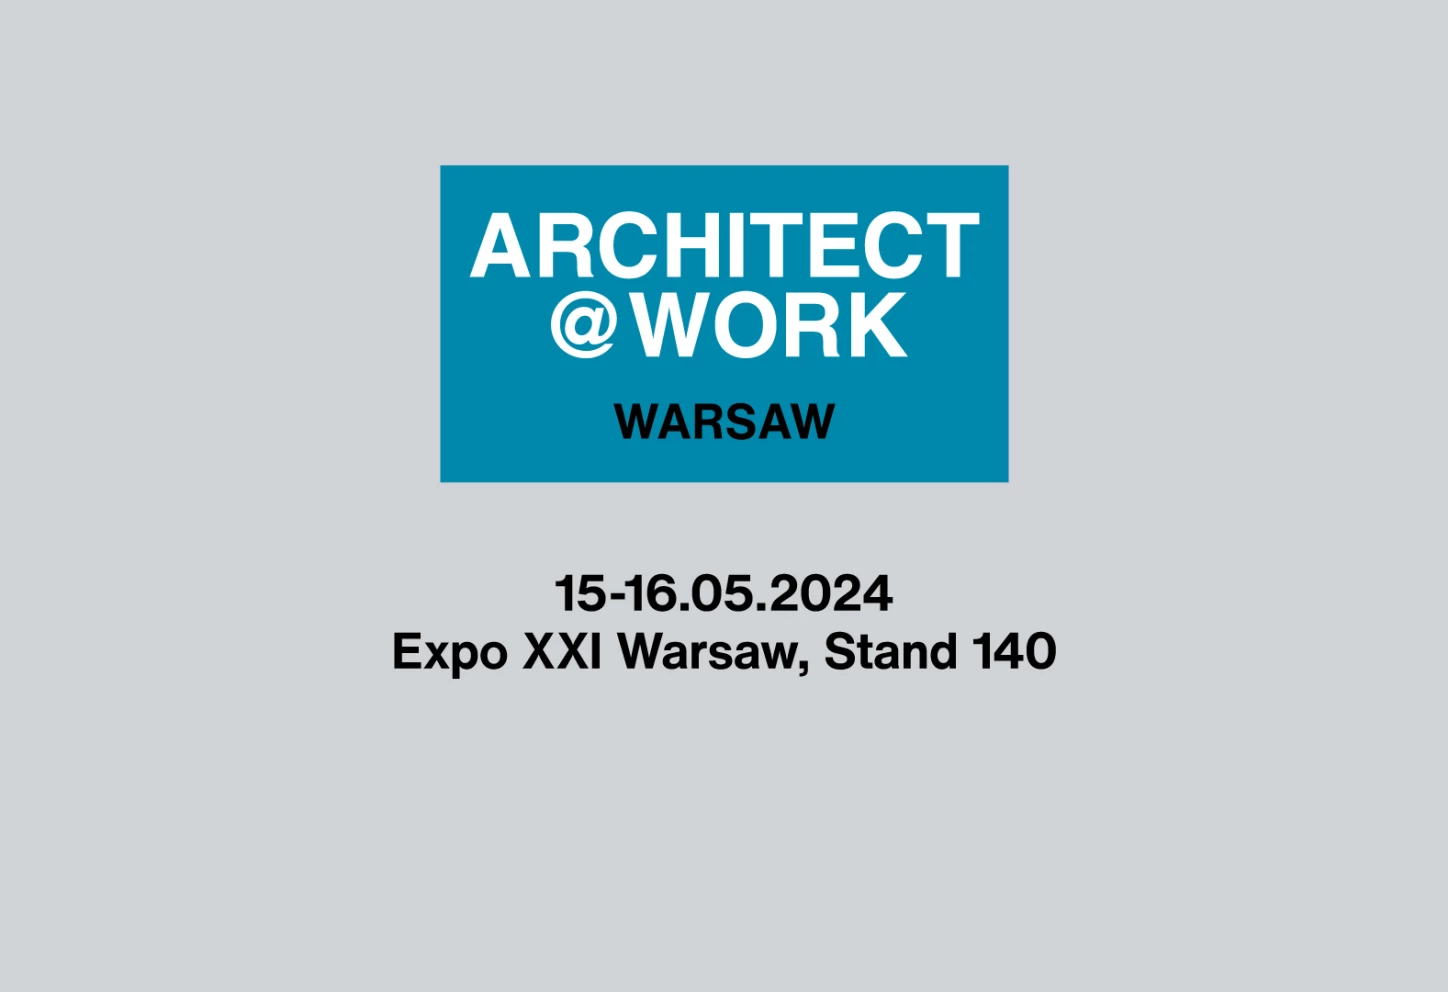 LUXIONA will be present at Architect@Work Warsaw, 15 & 16 May 2024